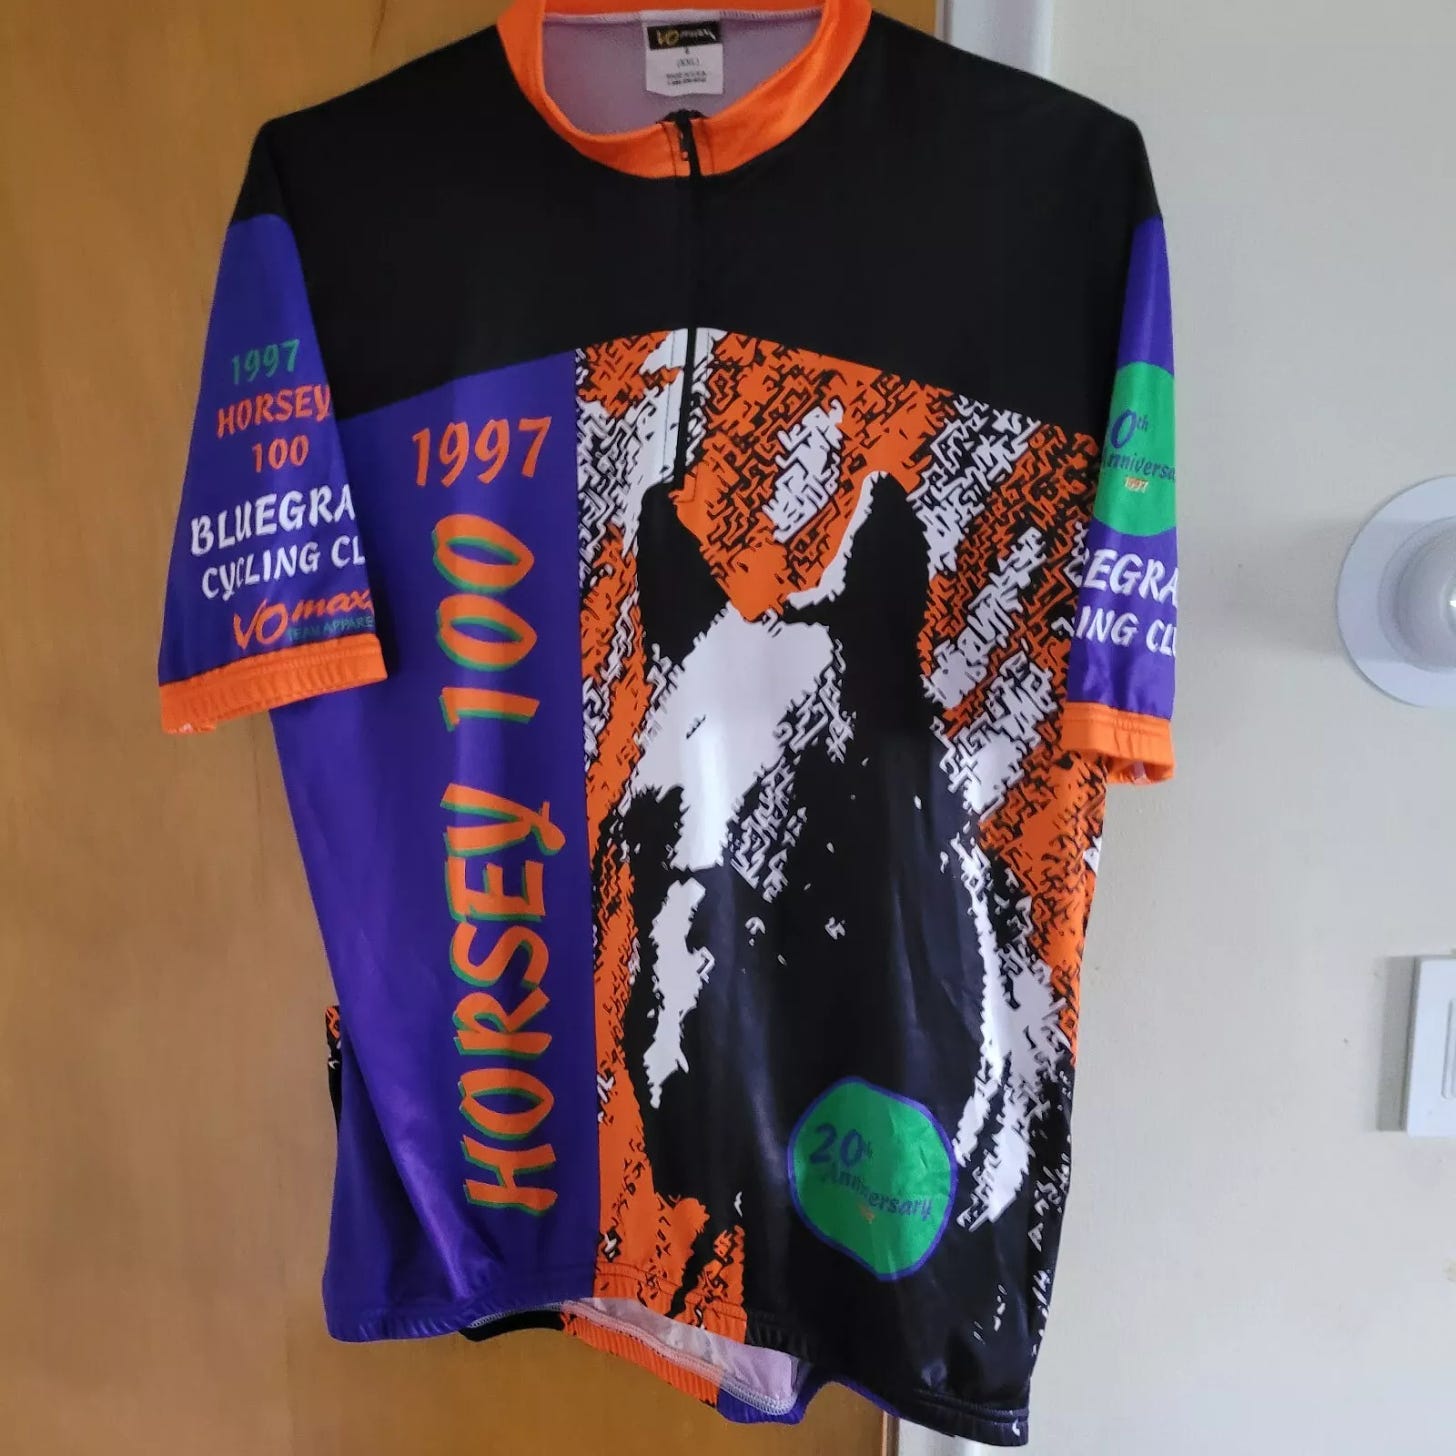 Vo Max Men's Cycling Jersey XXL from Horsey Hundred 1997 - Picture 1 of 1